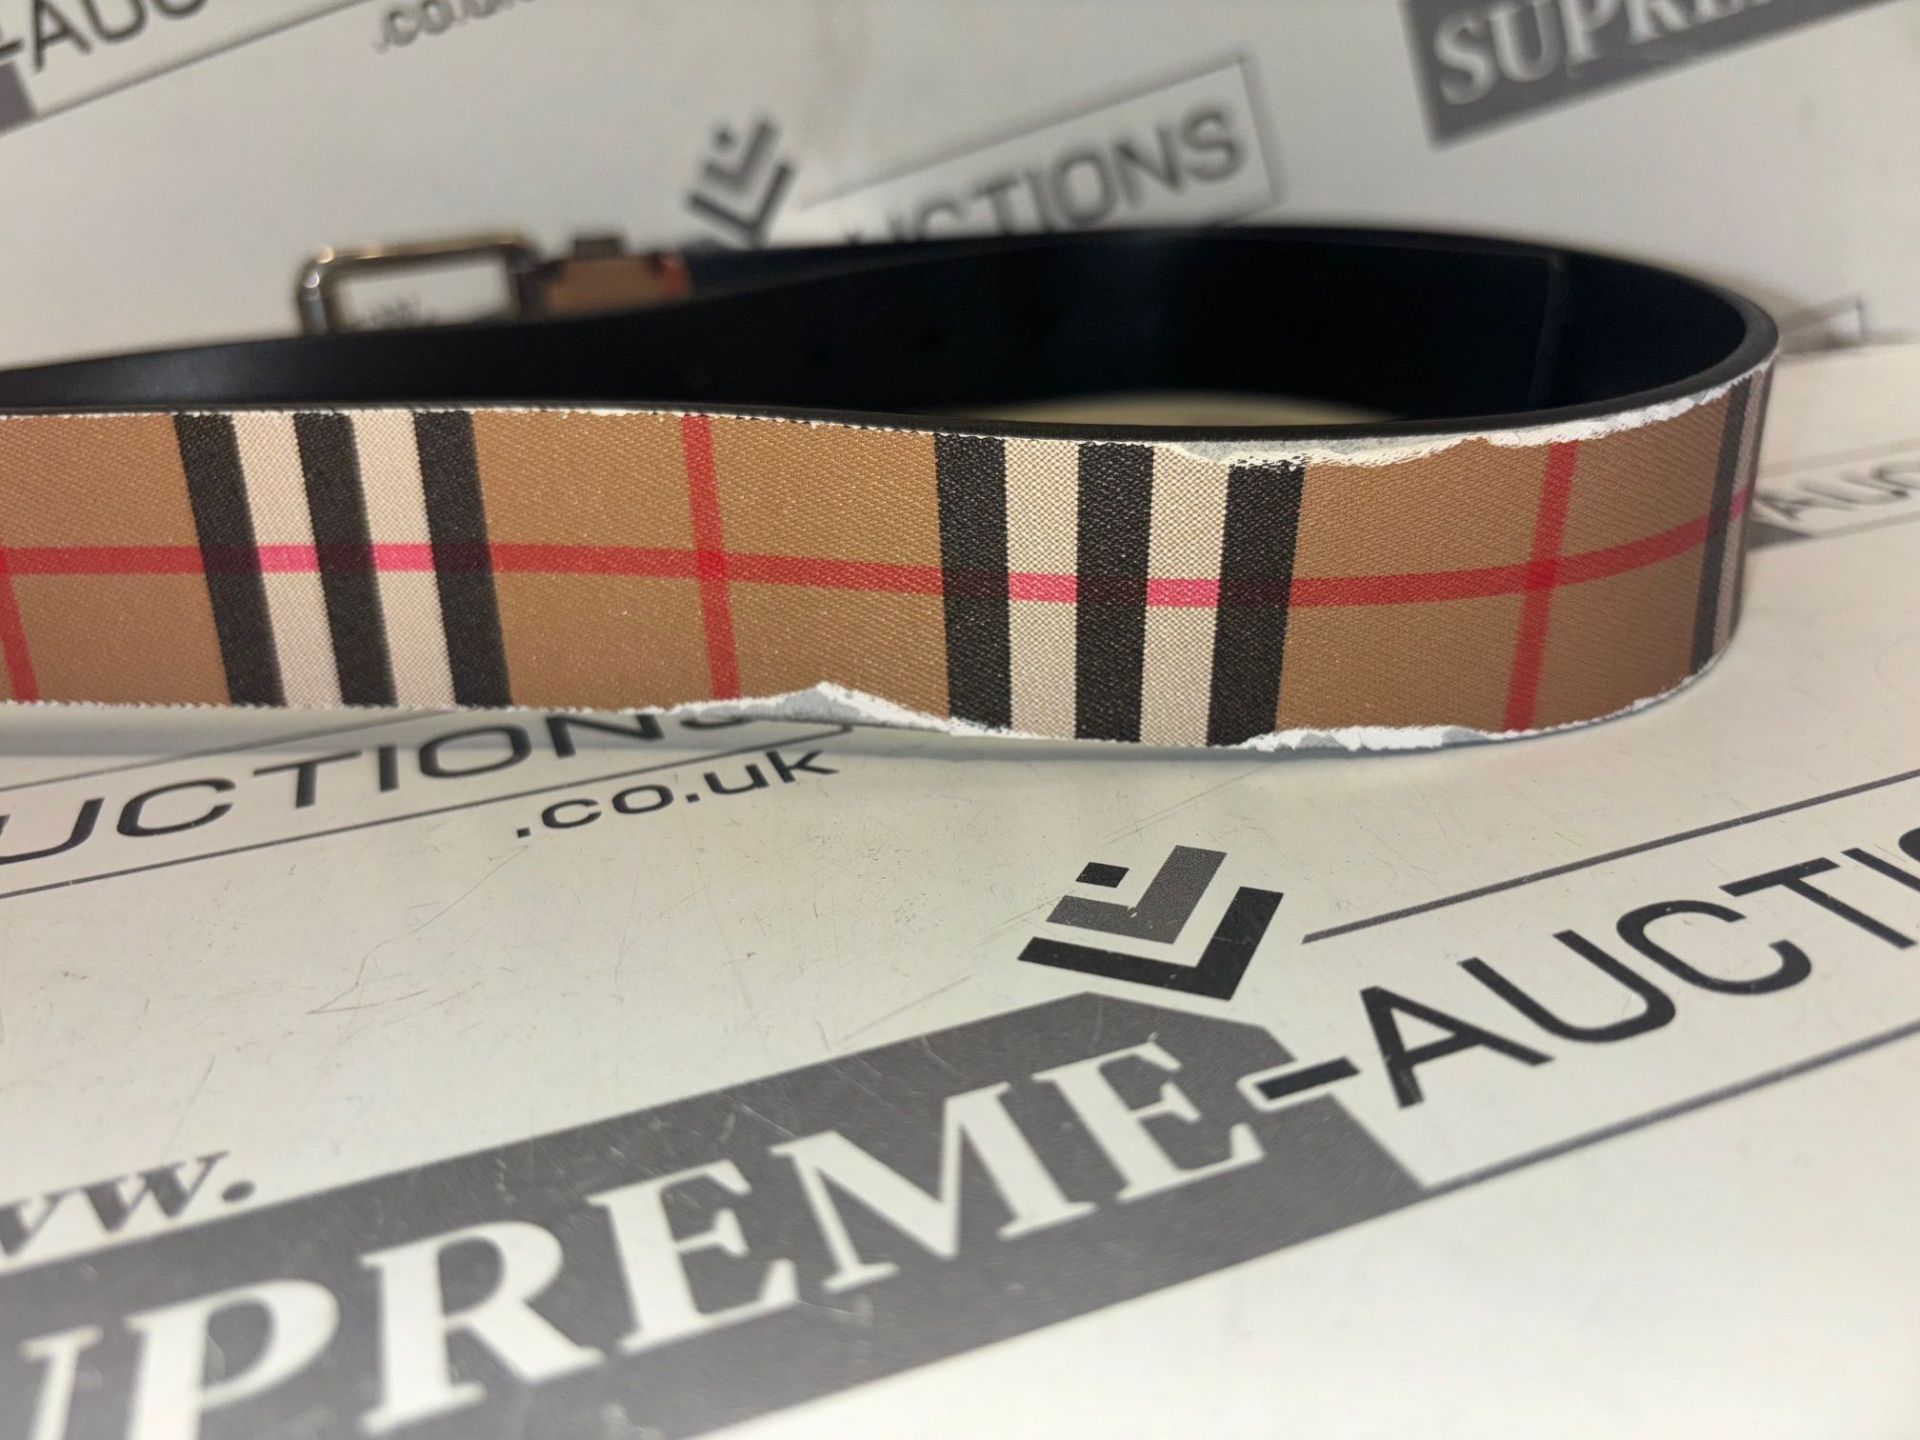 Genuine Burberry Vintage Check Belt. RRP £510. Single prong buckle Adjustable fit Cotton/leather/ - Image 5 of 7